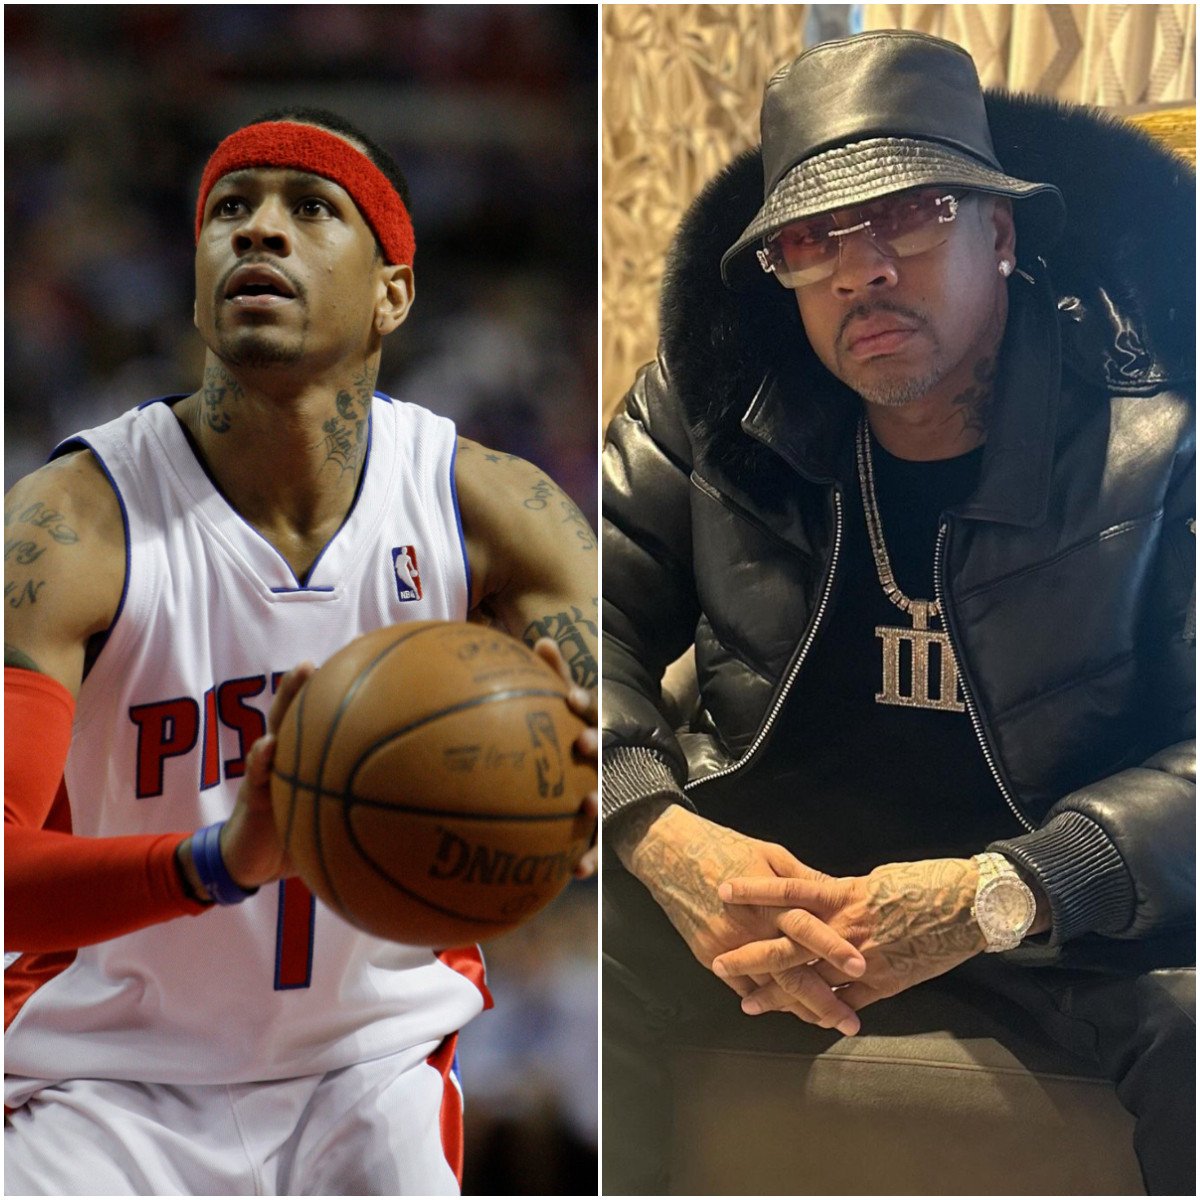 Allen Iverson, NBA star and entrepreneur, in his pre-2012 heyday (left) and now. Photos: AP, @theofficialai3/Instagram